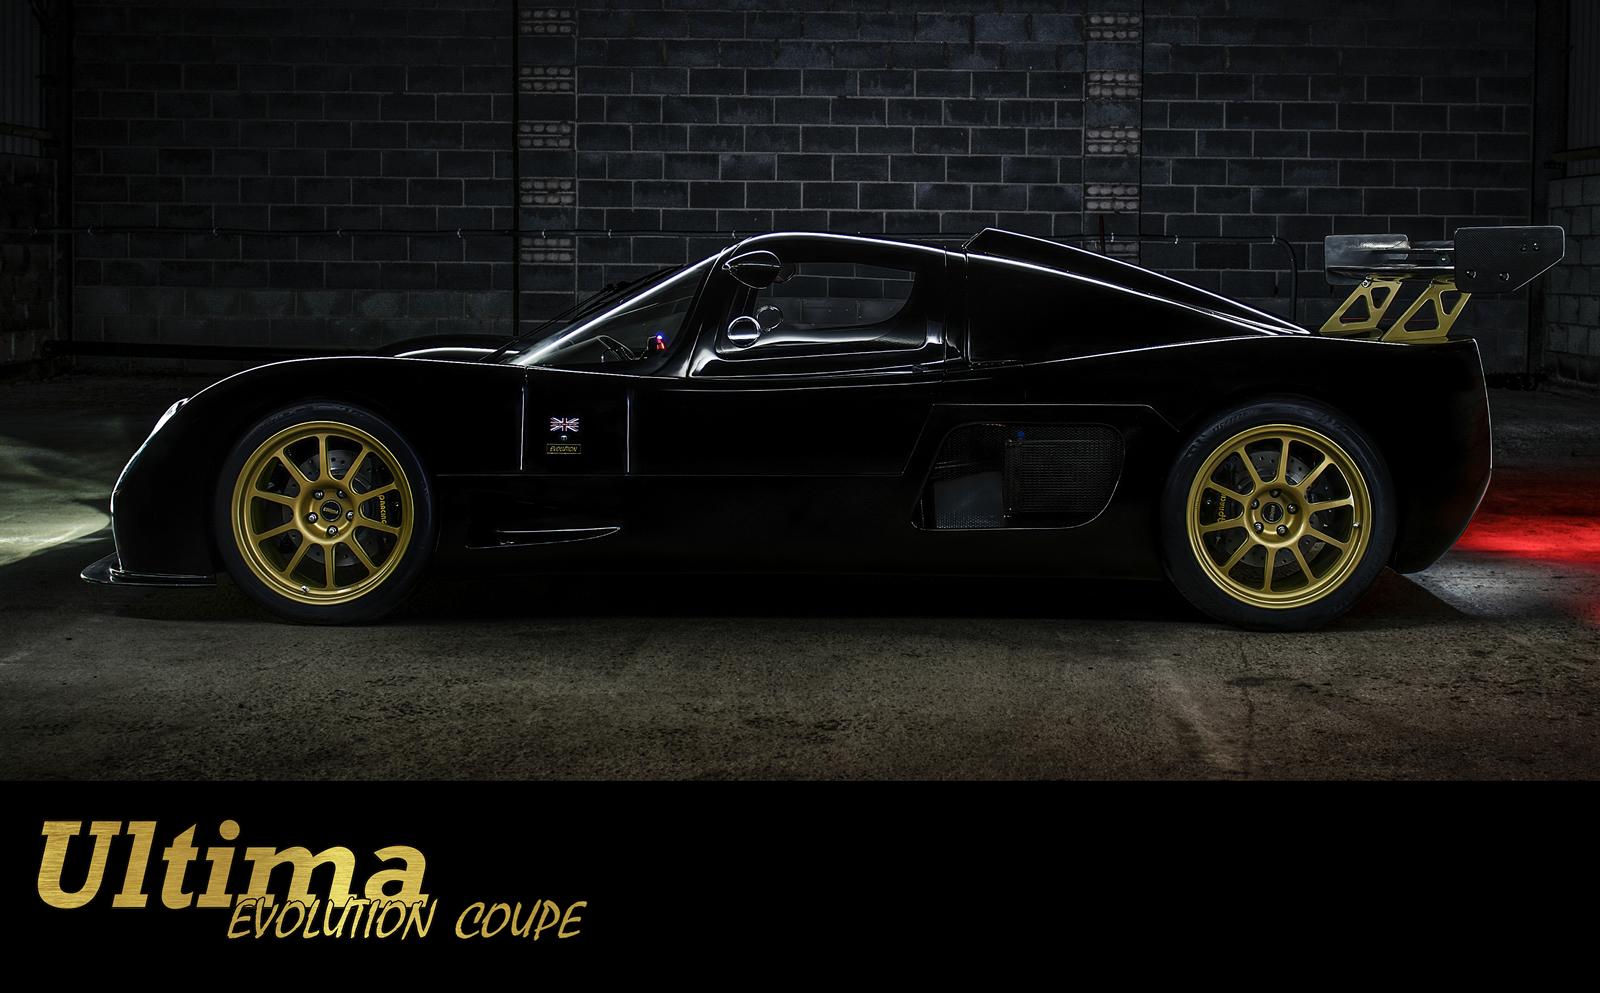 ultima-evolution-makes-video-debut-with-all-its-1020-horsepower-video-photo-gallery_12